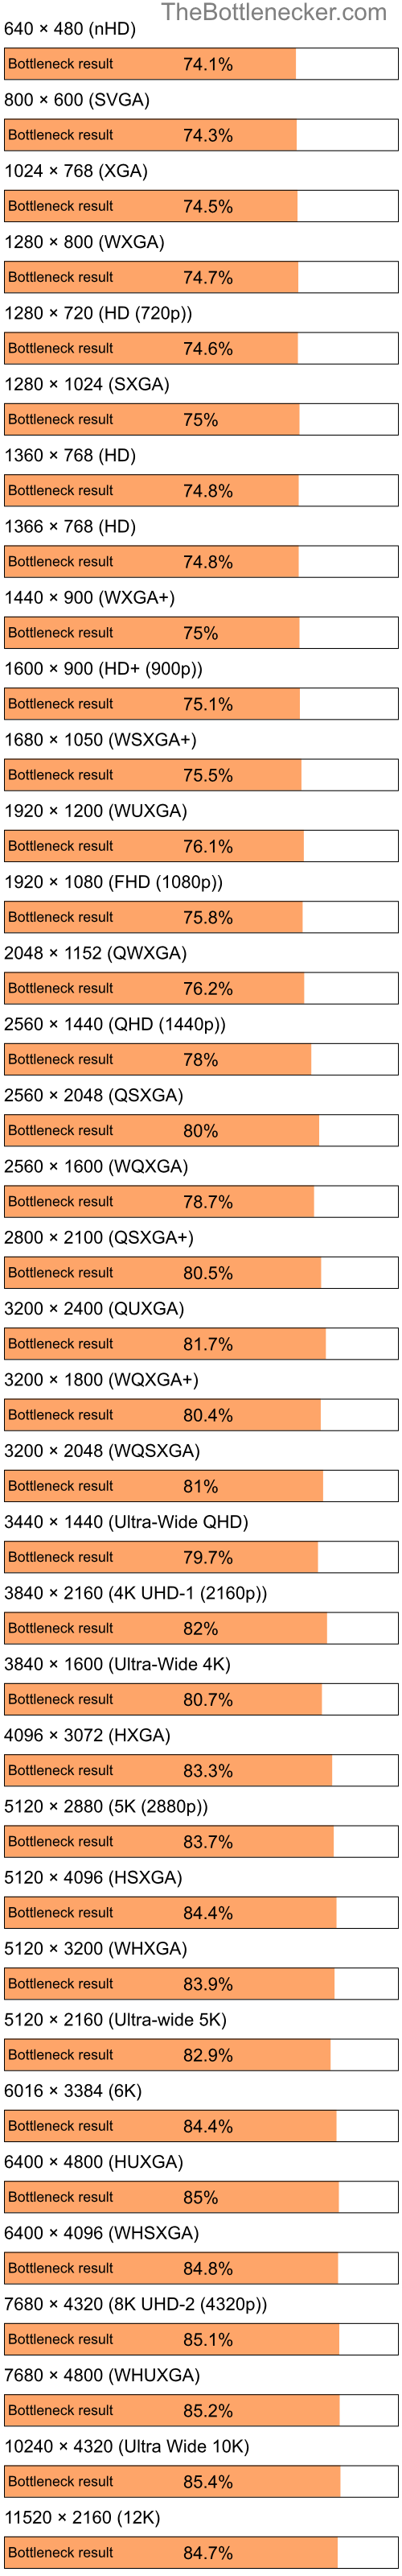 Bottleneck results by resolution for Intel Celeron M 410 and NVIDIA GeForce Go 6600 in Graphic Card Intense Tasks